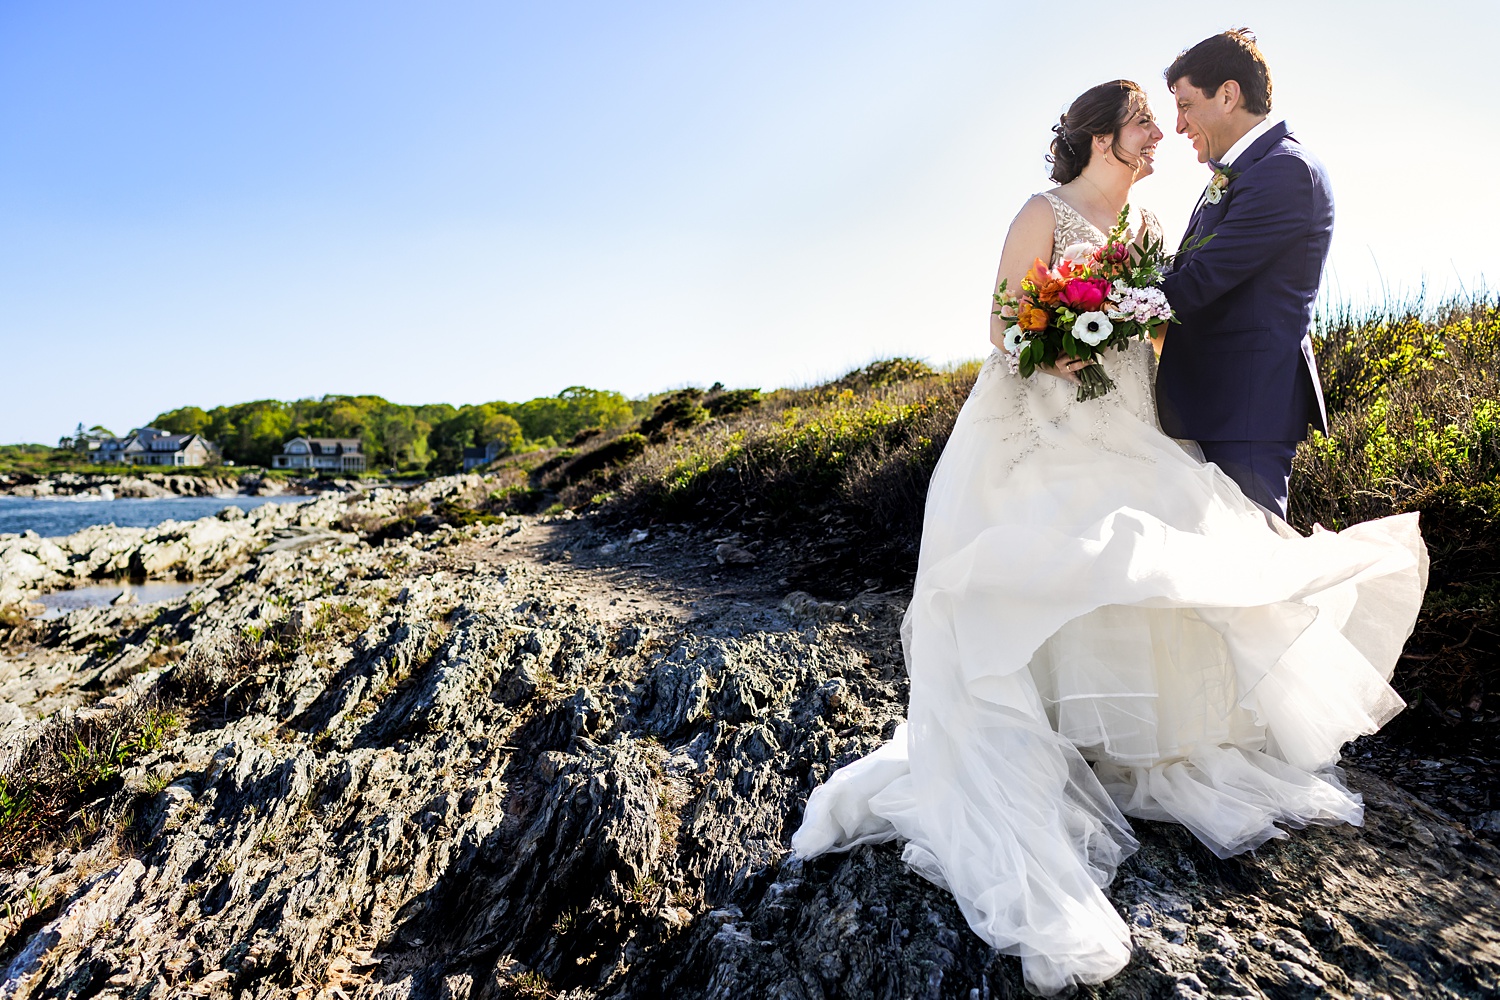 After their Cape Elizabeth Maine ceremony, the newlyweds smile out on the cliffs at Trundy Point